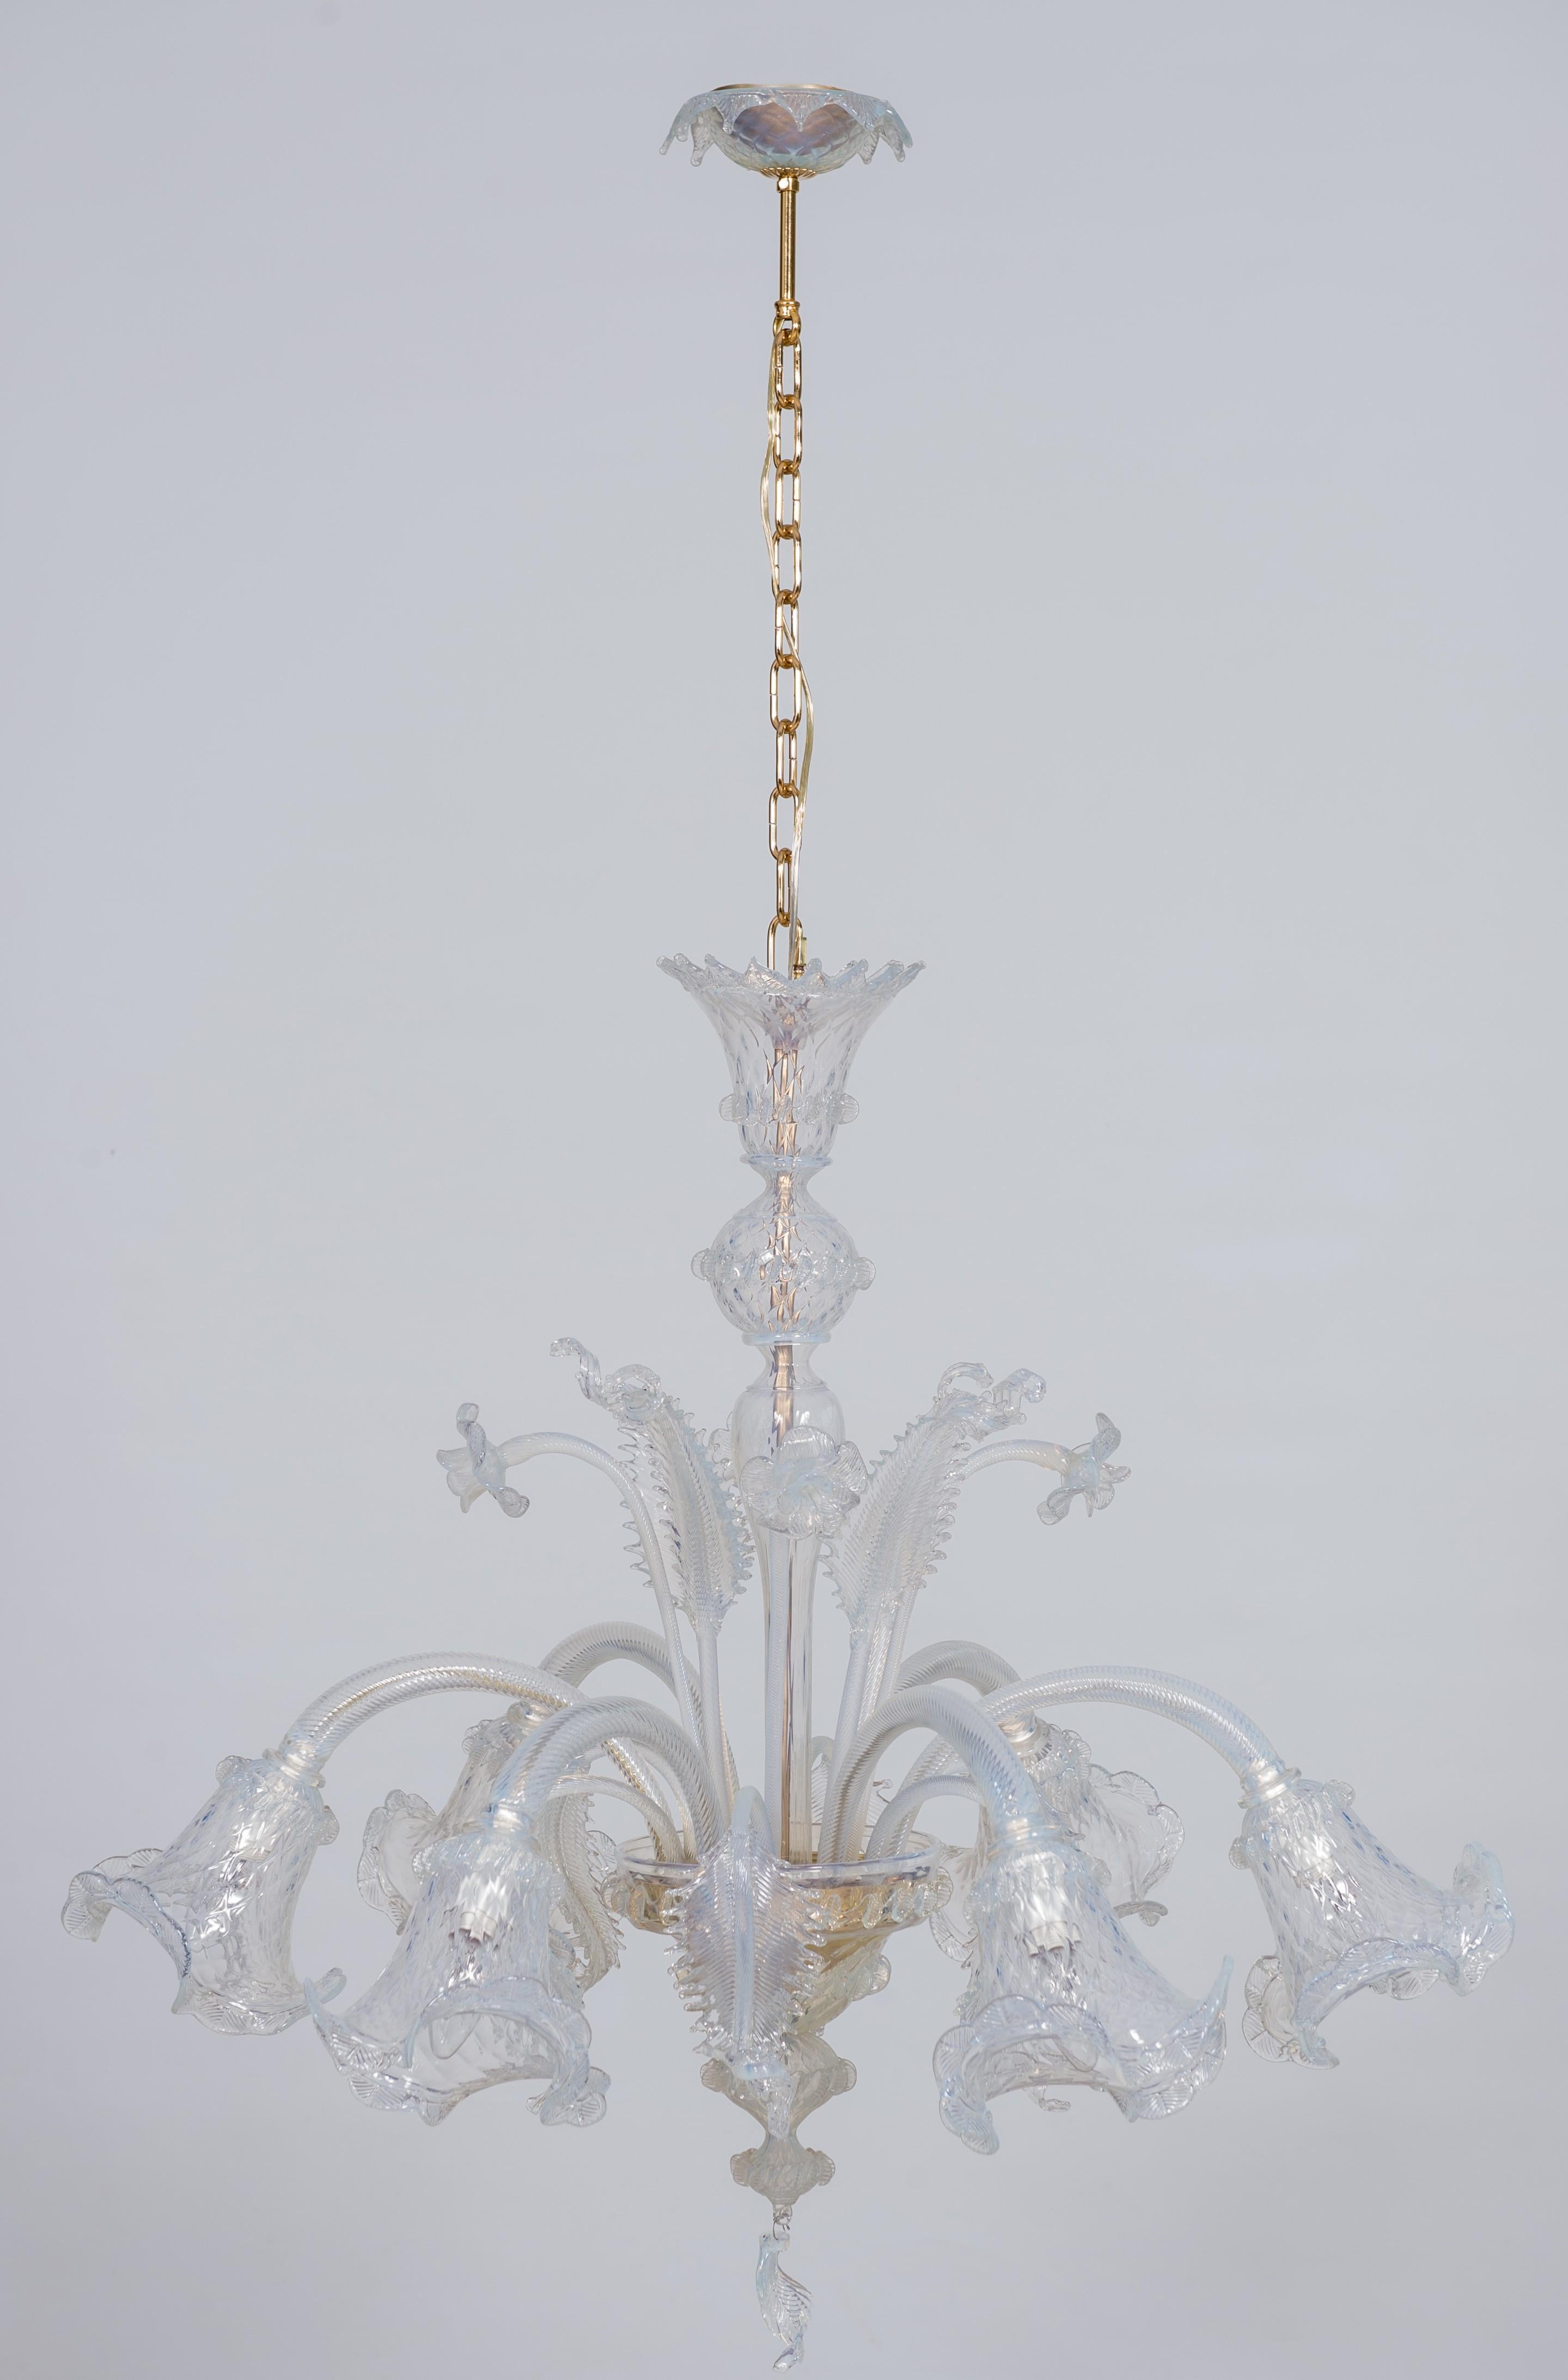 Opaline Chandelier in blown Murano Glass gold frame with flowers 1990s Italy.
The central stem is made of opaline glass, and goes from the ceiling down to the base of the chandelier, from which six transparent arms spread out, gently bend downwards,